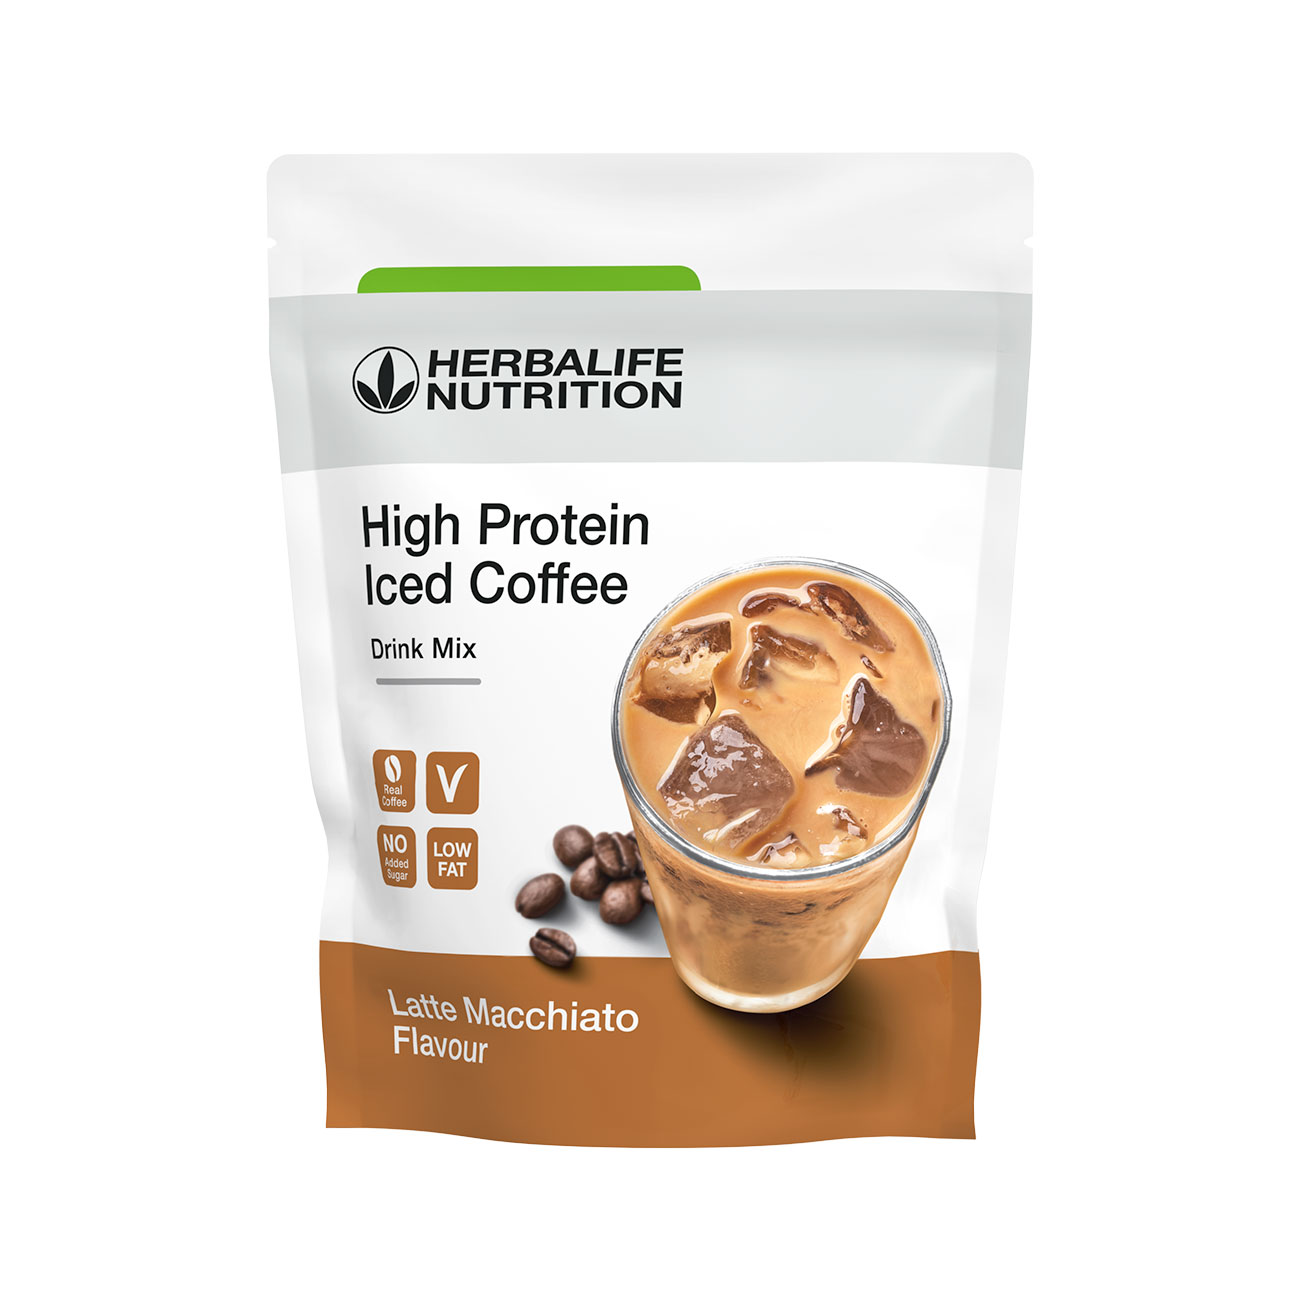 High Protein Iced Coffee  latte macchiato product shot